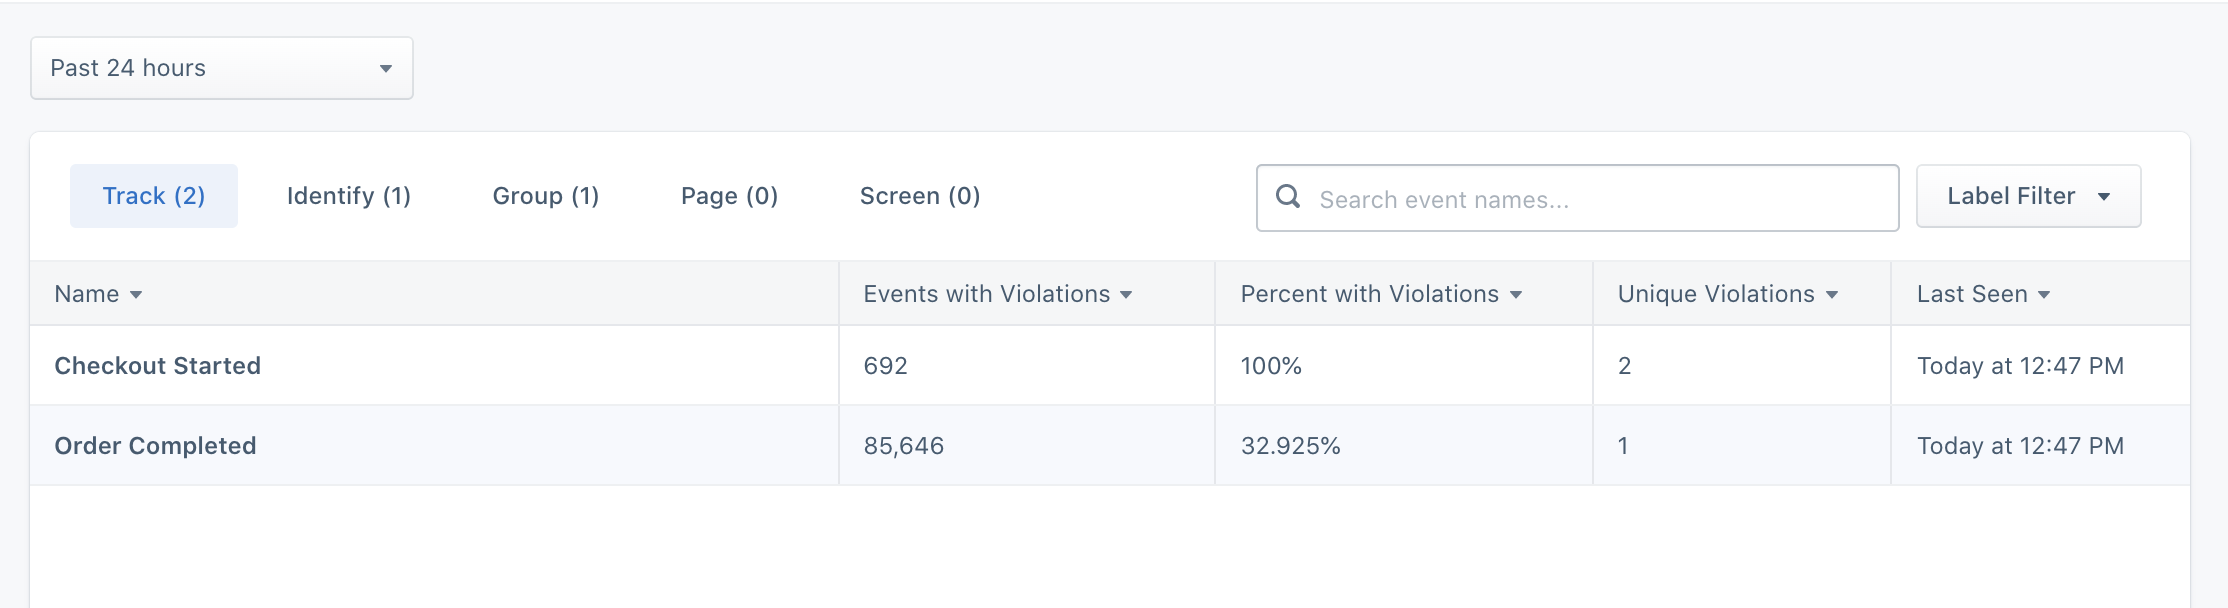 Screenshot of the Violations page, with two Track events that have violations.